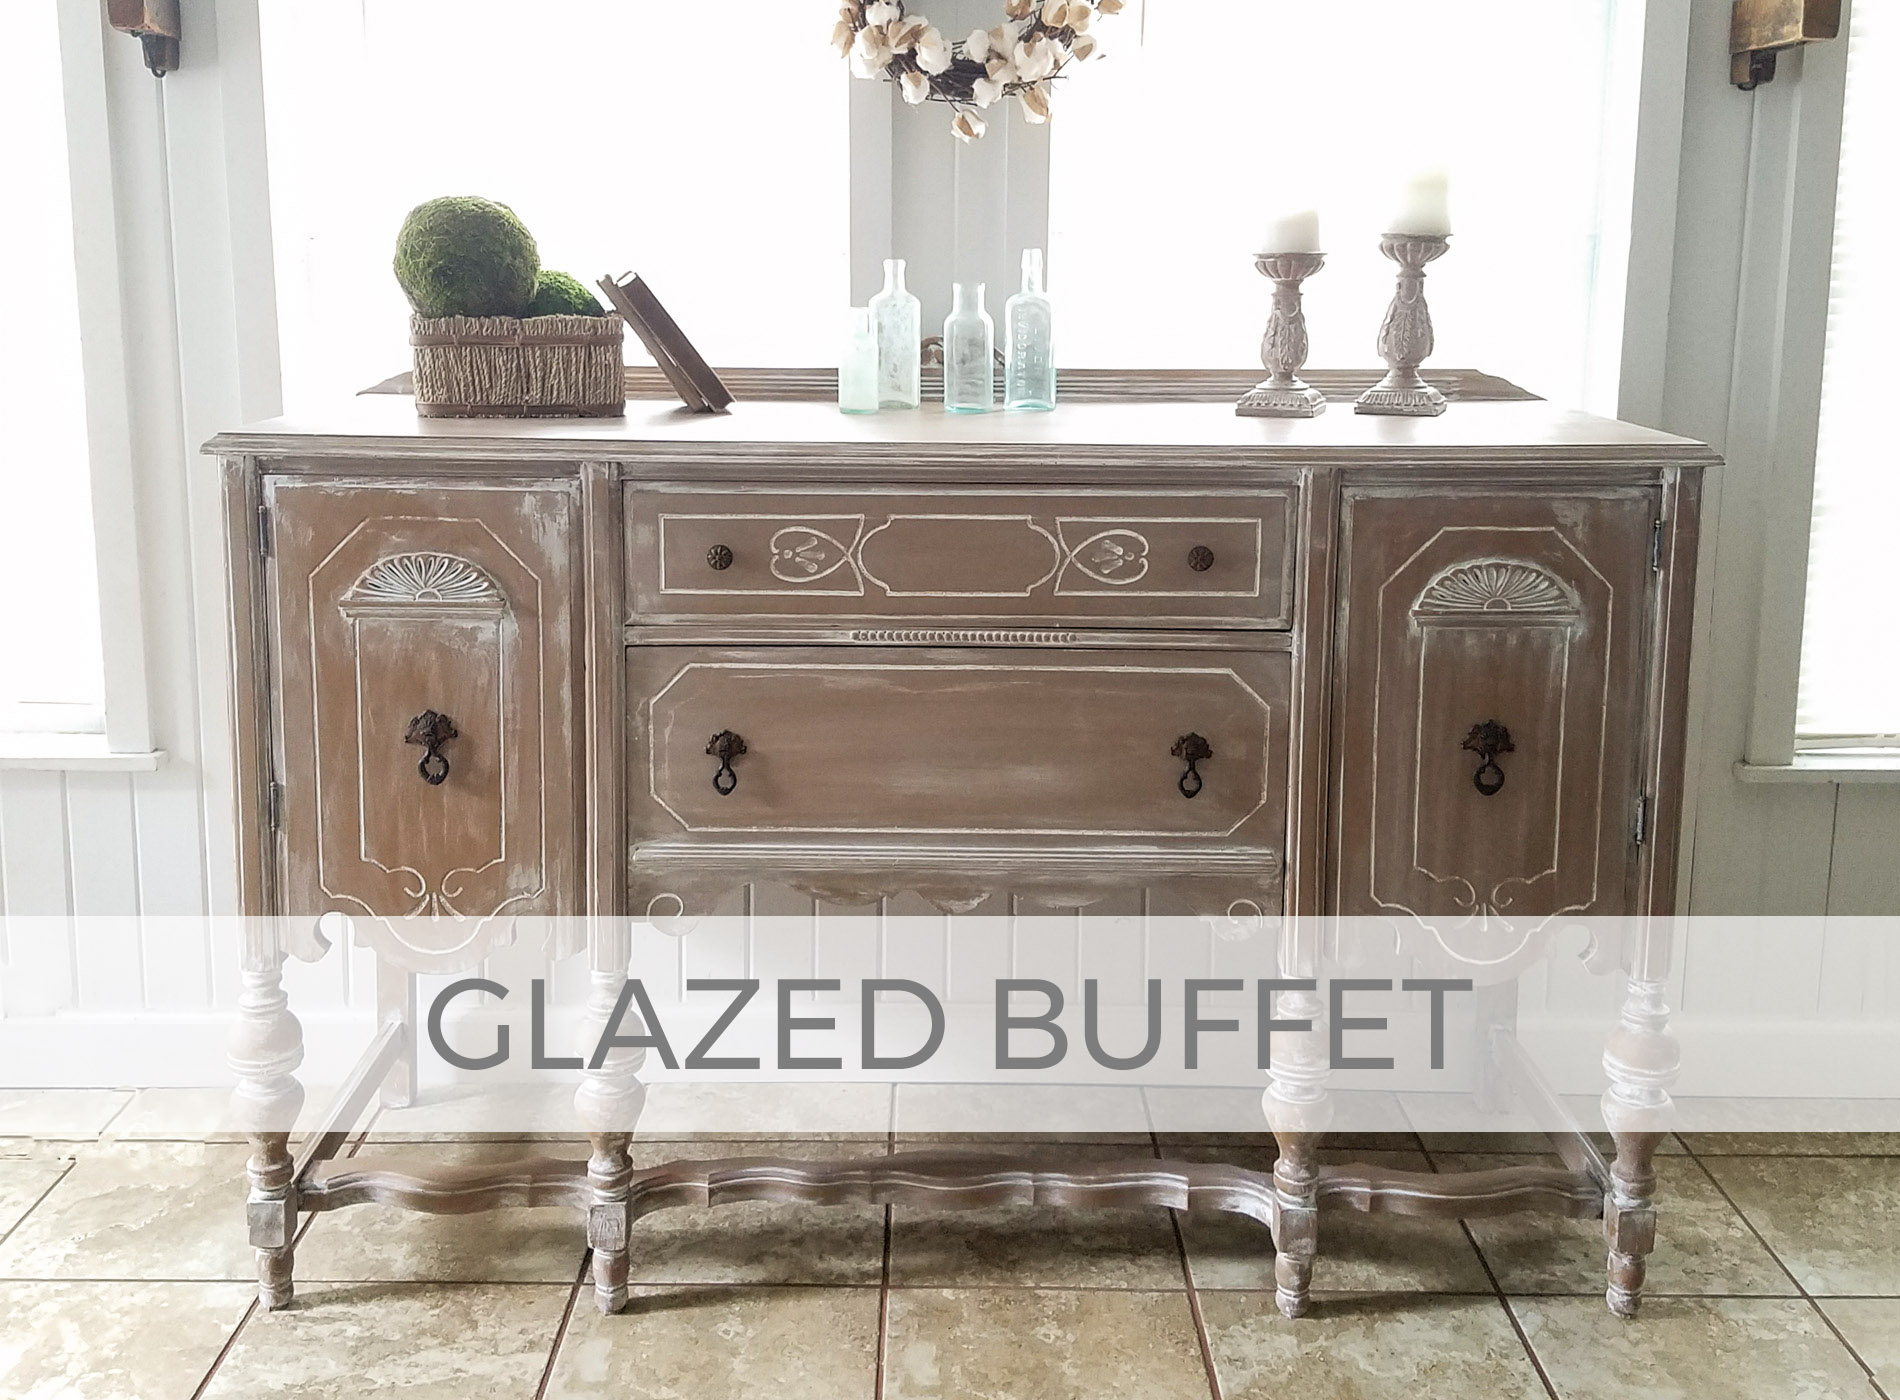 Antique Buffet with Glazed Finish by Larissa of Prodigal Pieces | prodigalpieces.com